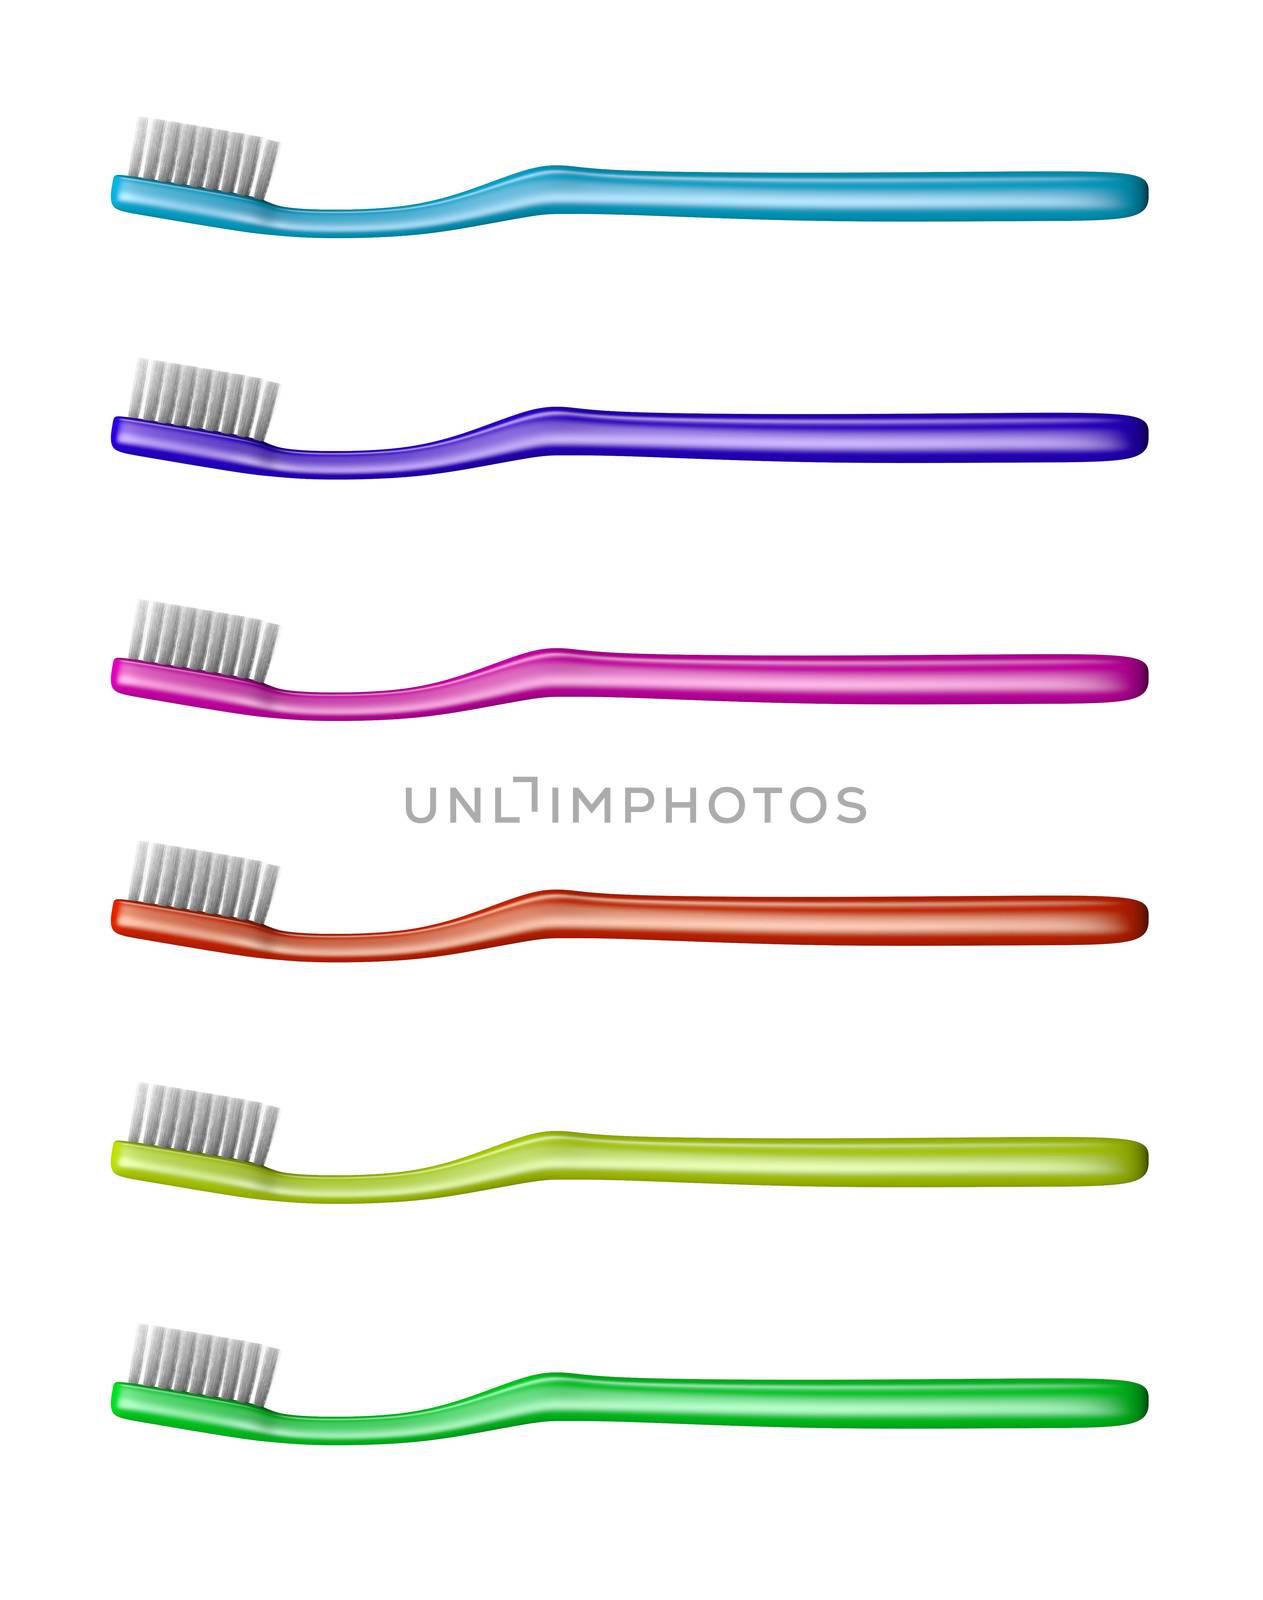 Toothbrush Collection Isolated on White by make